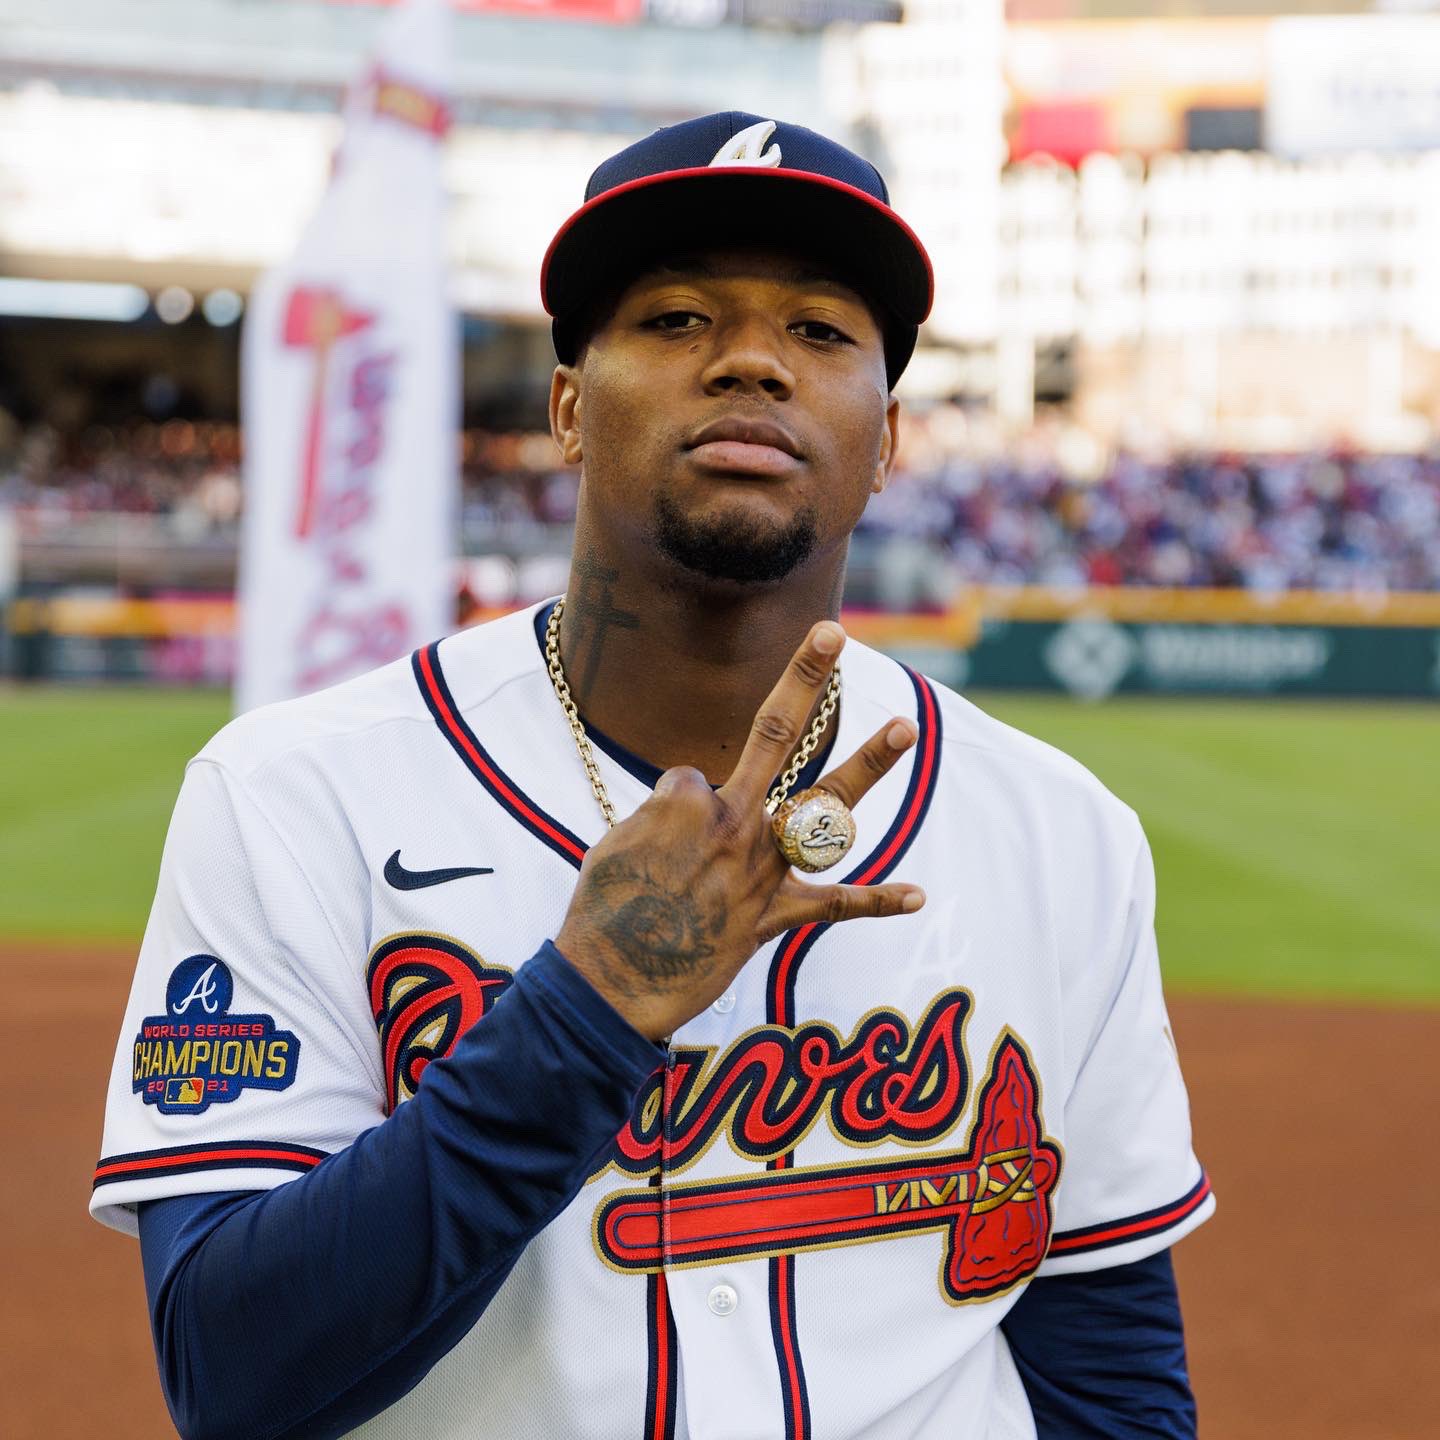 Martin on X: Ronald Acuna received his World Championship ring. The Braves  will only get better when he is back in the lineup. Watch out rest of the  league. #Braves #ForTheA  /